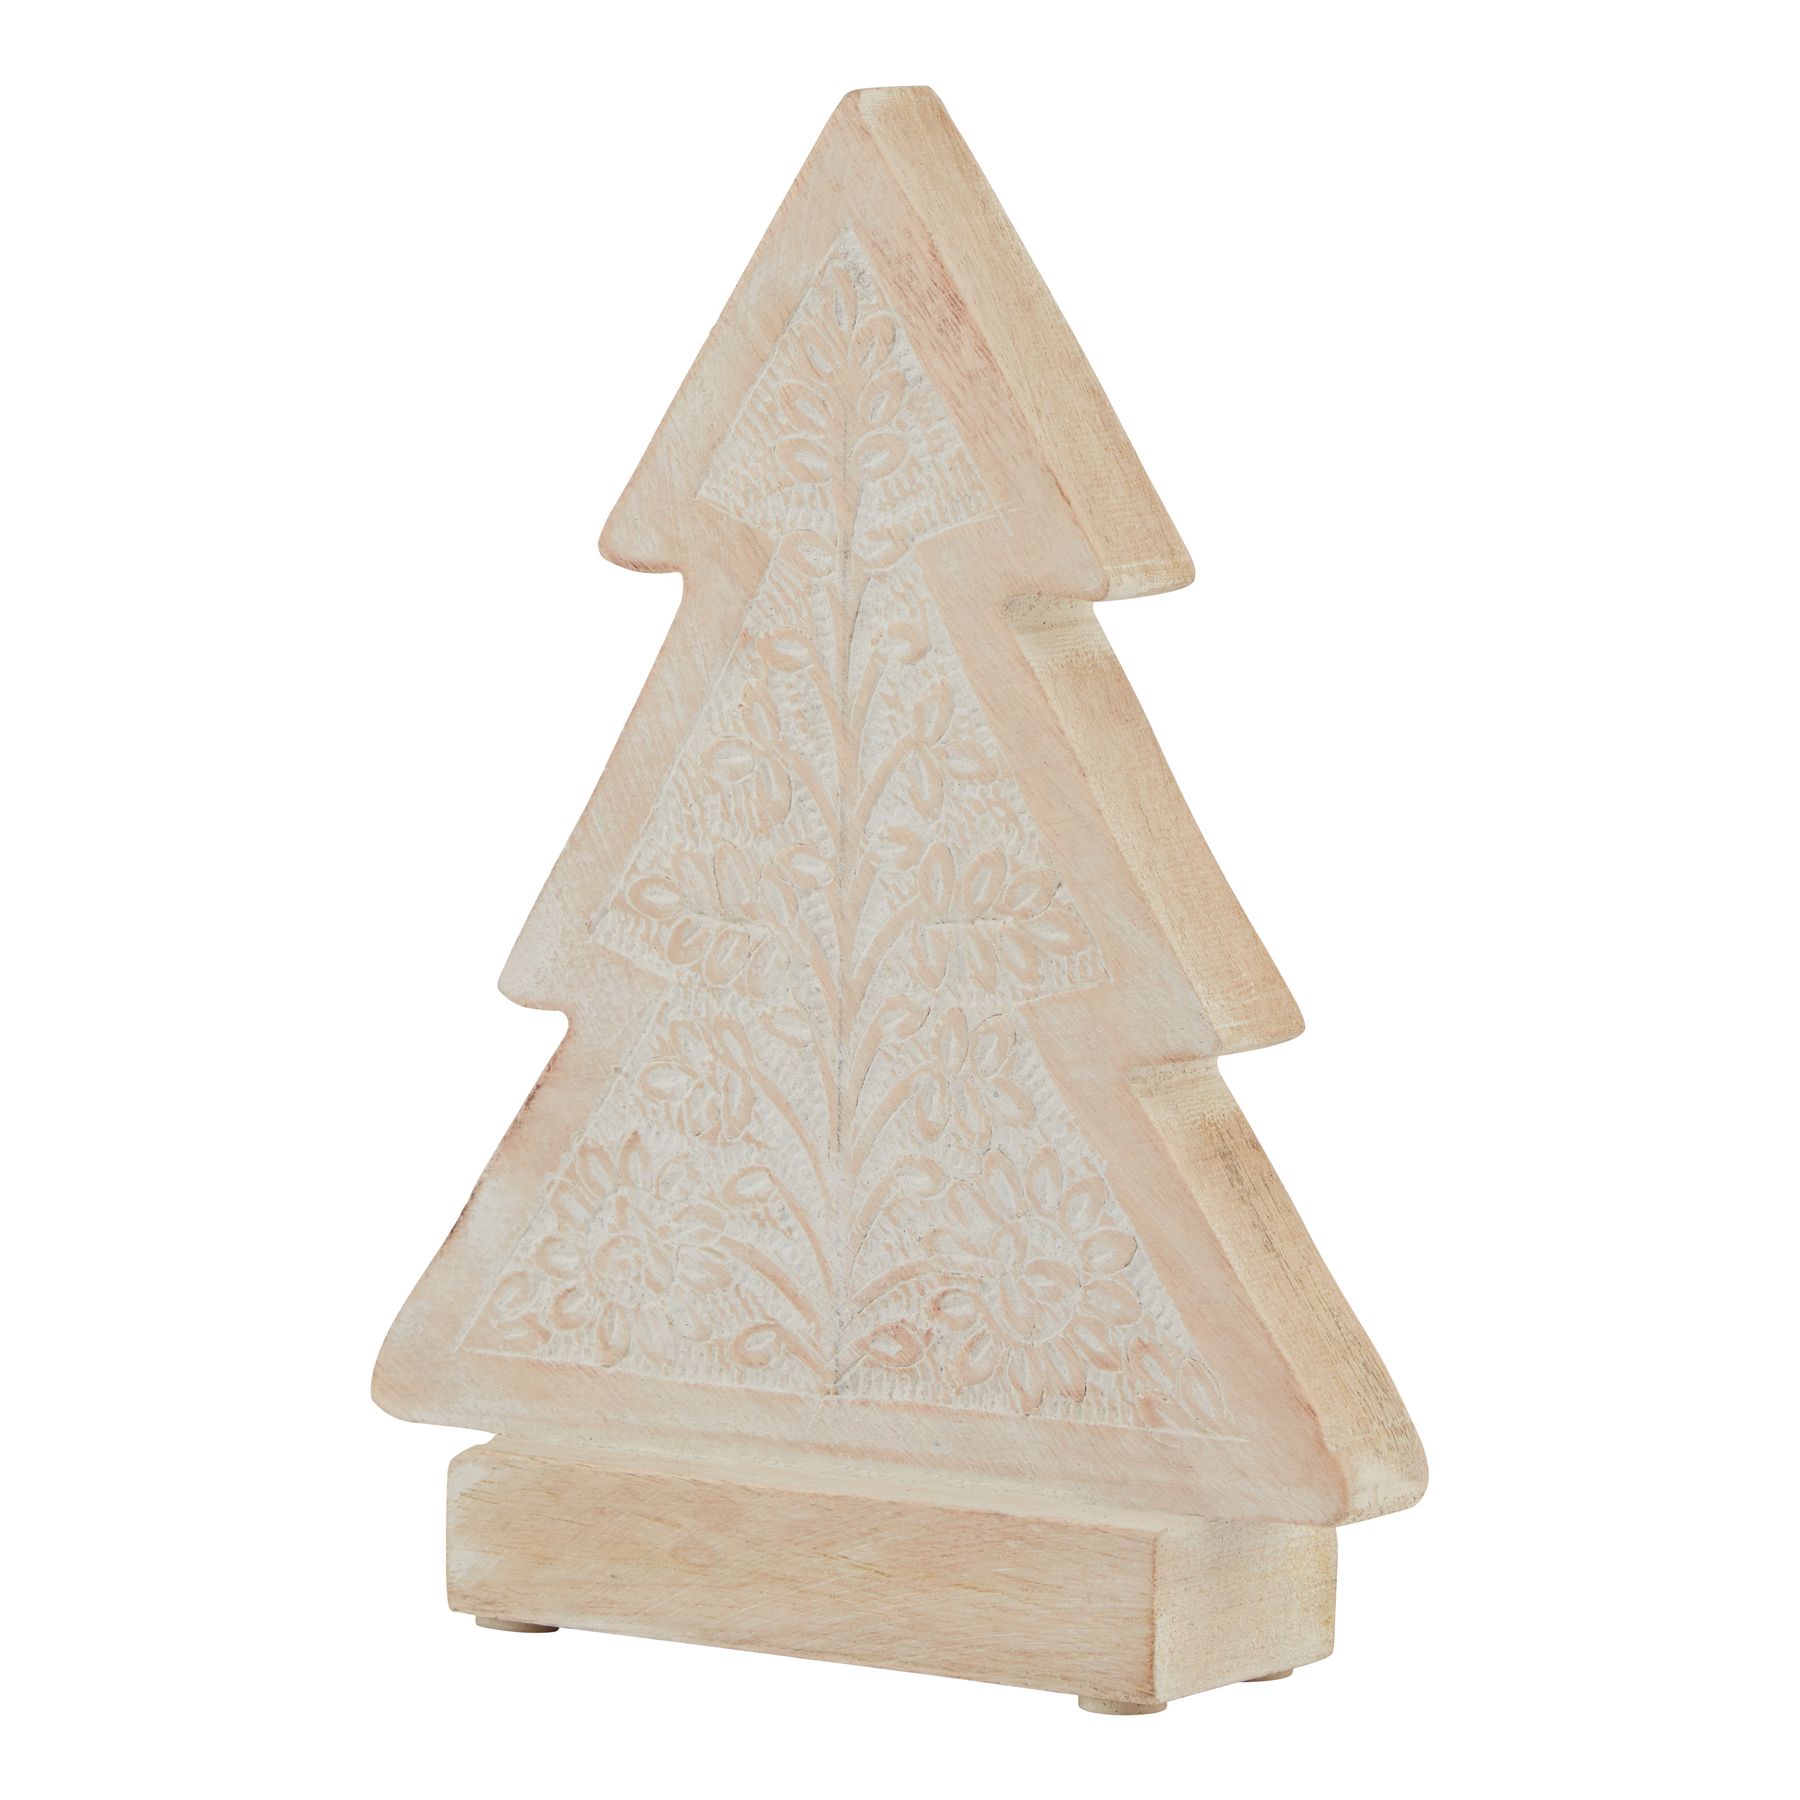 White Wash Collection Wooden Patterned Decorative Tree - Image 1